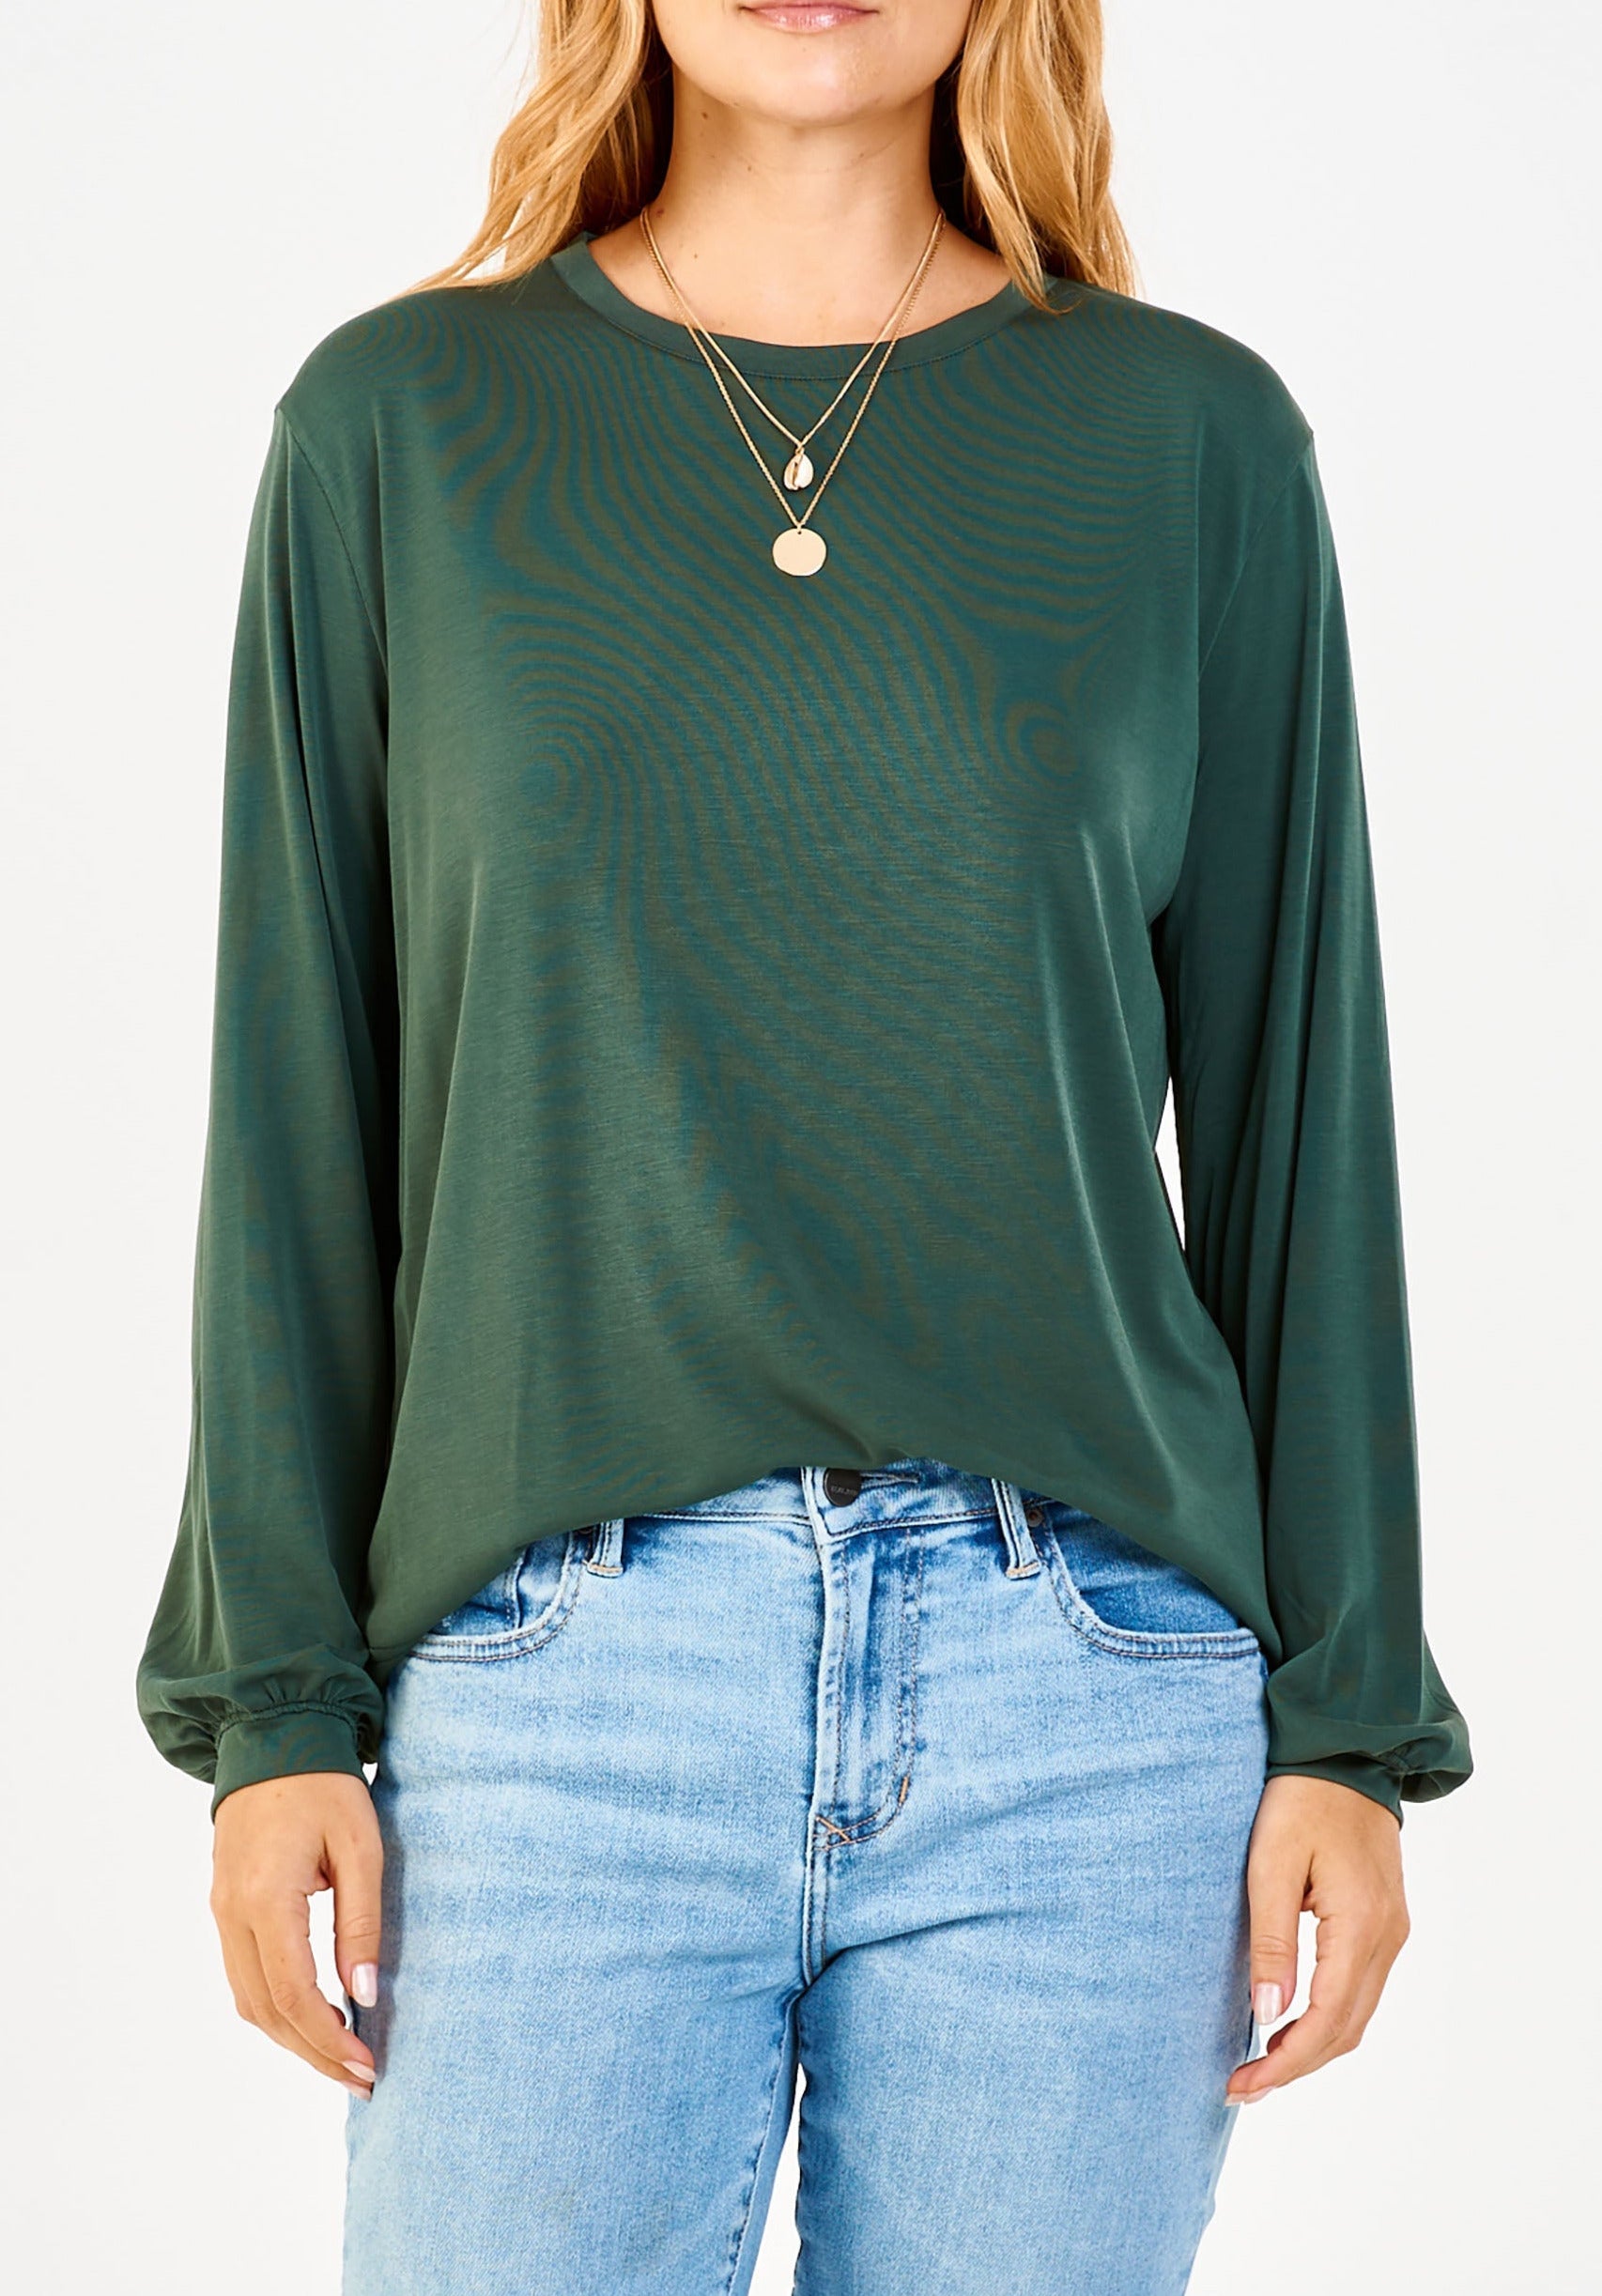 matilda-basic-long-sleeve-top-emerald-front--image-another-love-clothing